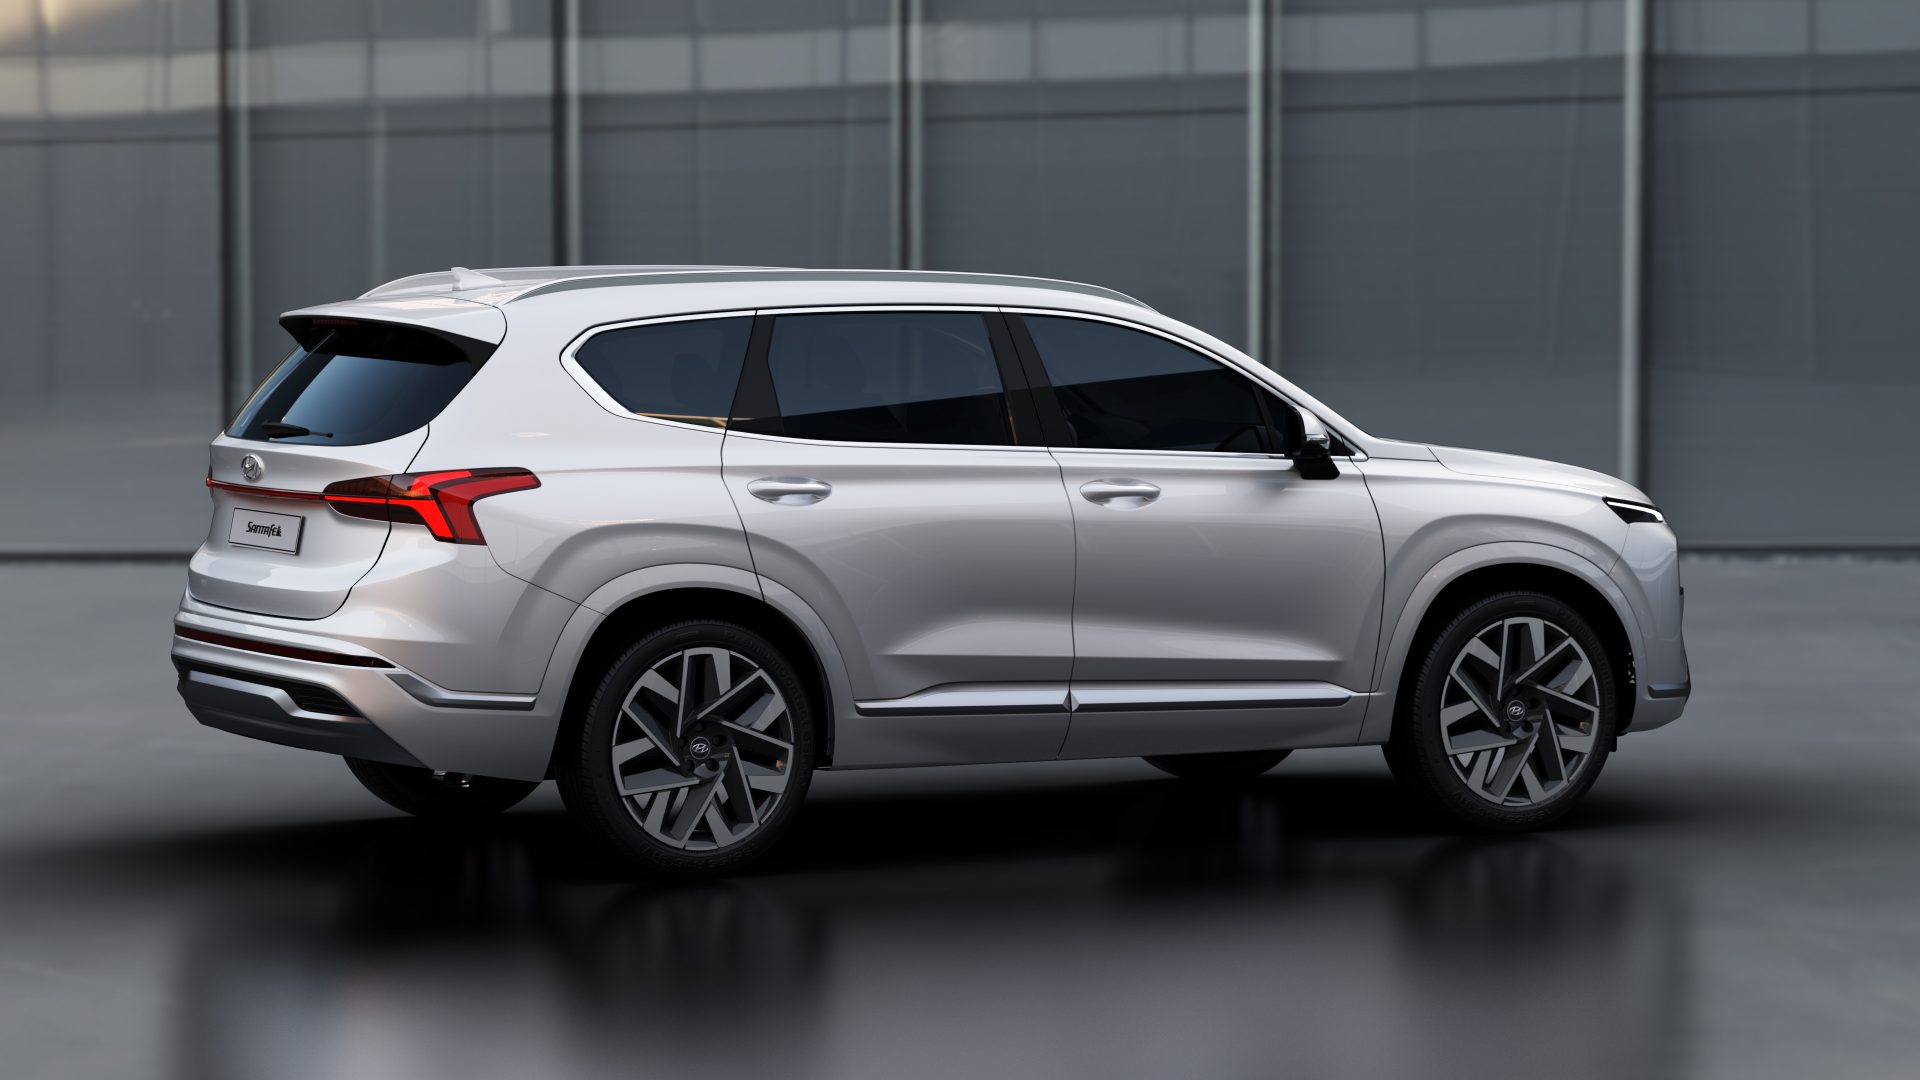 The 2022 Hyundai Santa Fe Calligraphy is an eye-catching mid-size SUV